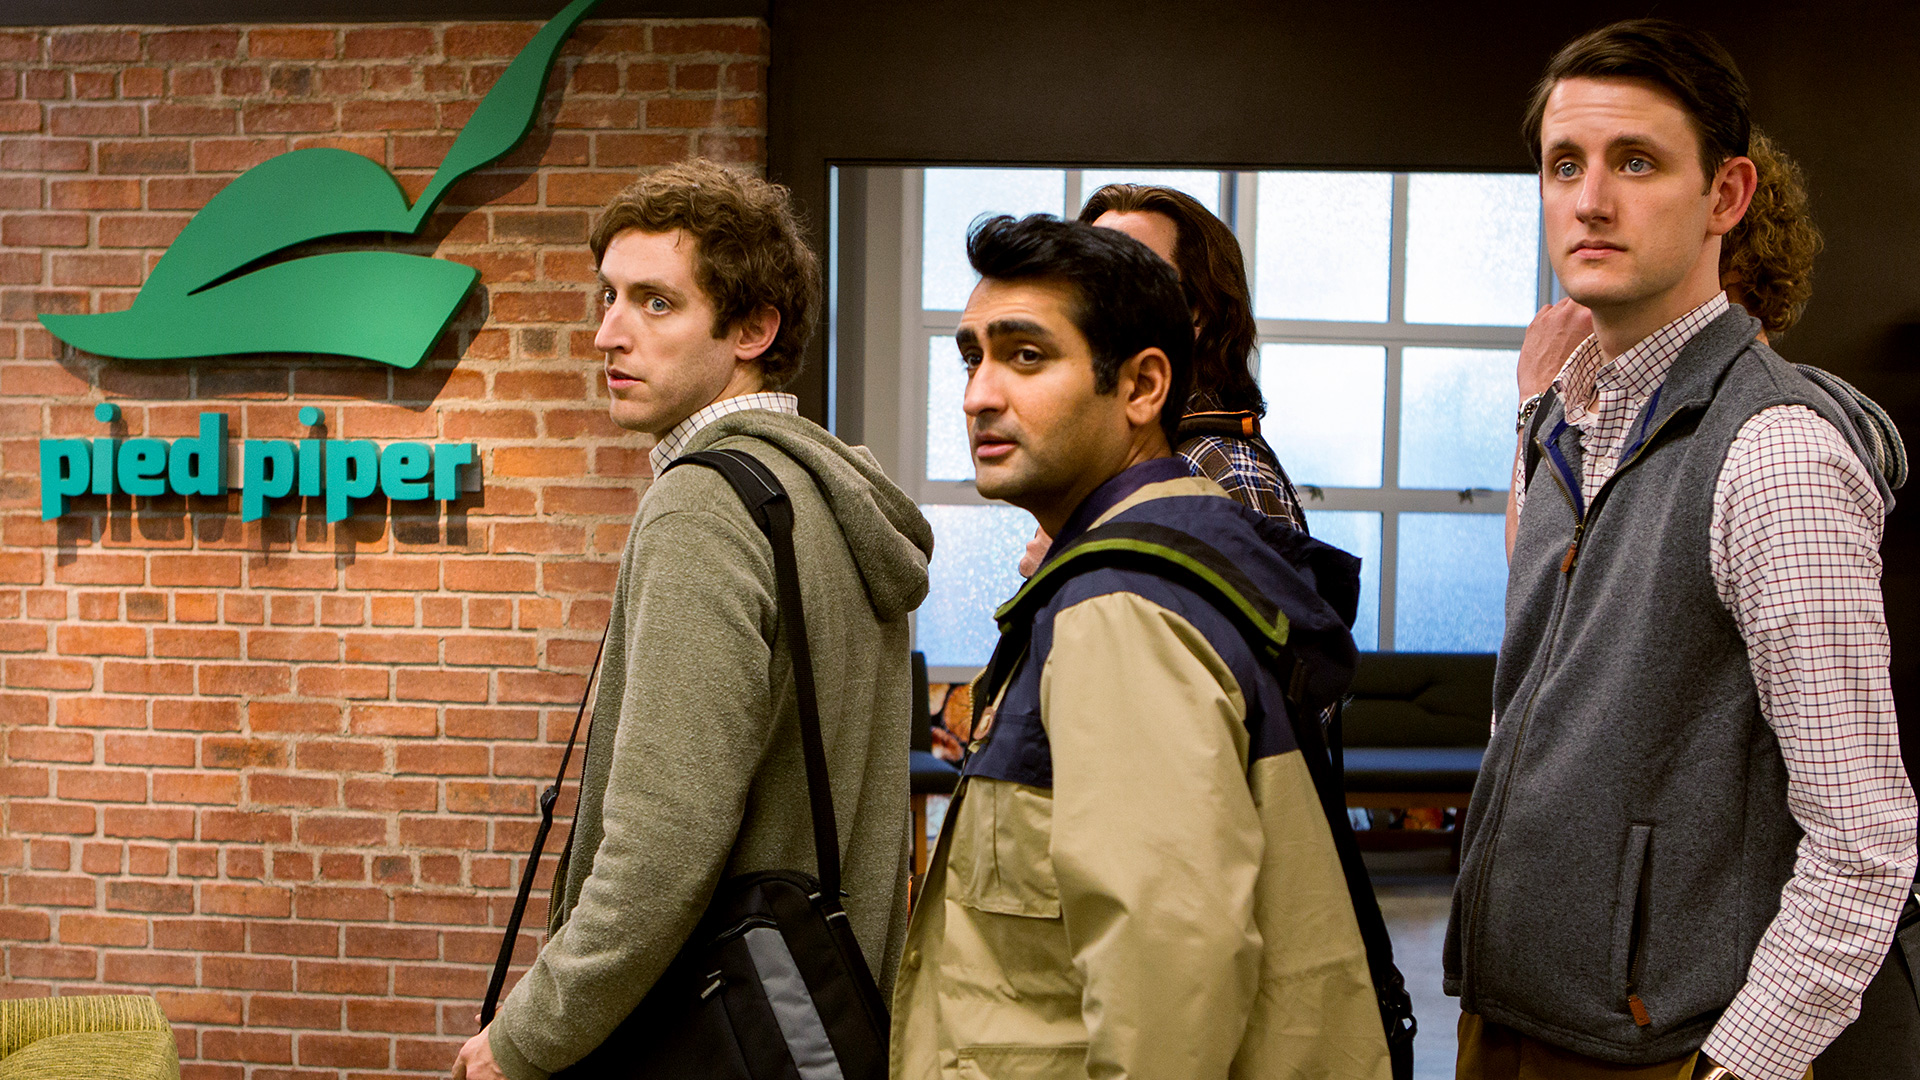 Silicon Valley Wallpapers